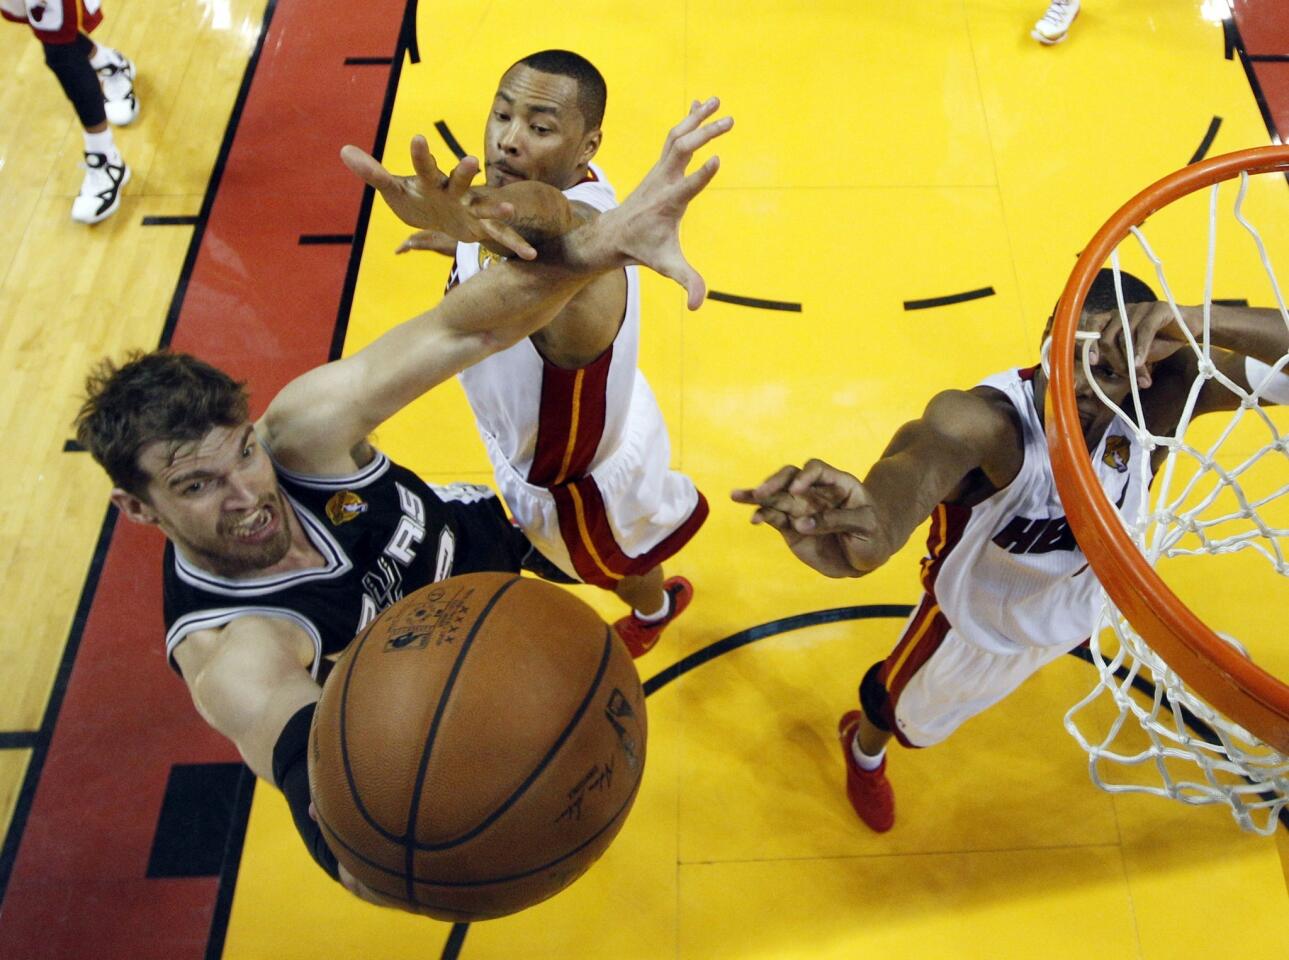 San Antonio Spurs center Tiago Splitter, right, puts up a shot over Miami Heat teammates Rashard Lewis, center, and Chris Bosh during the first half of Game 3 of the NBA Finals.